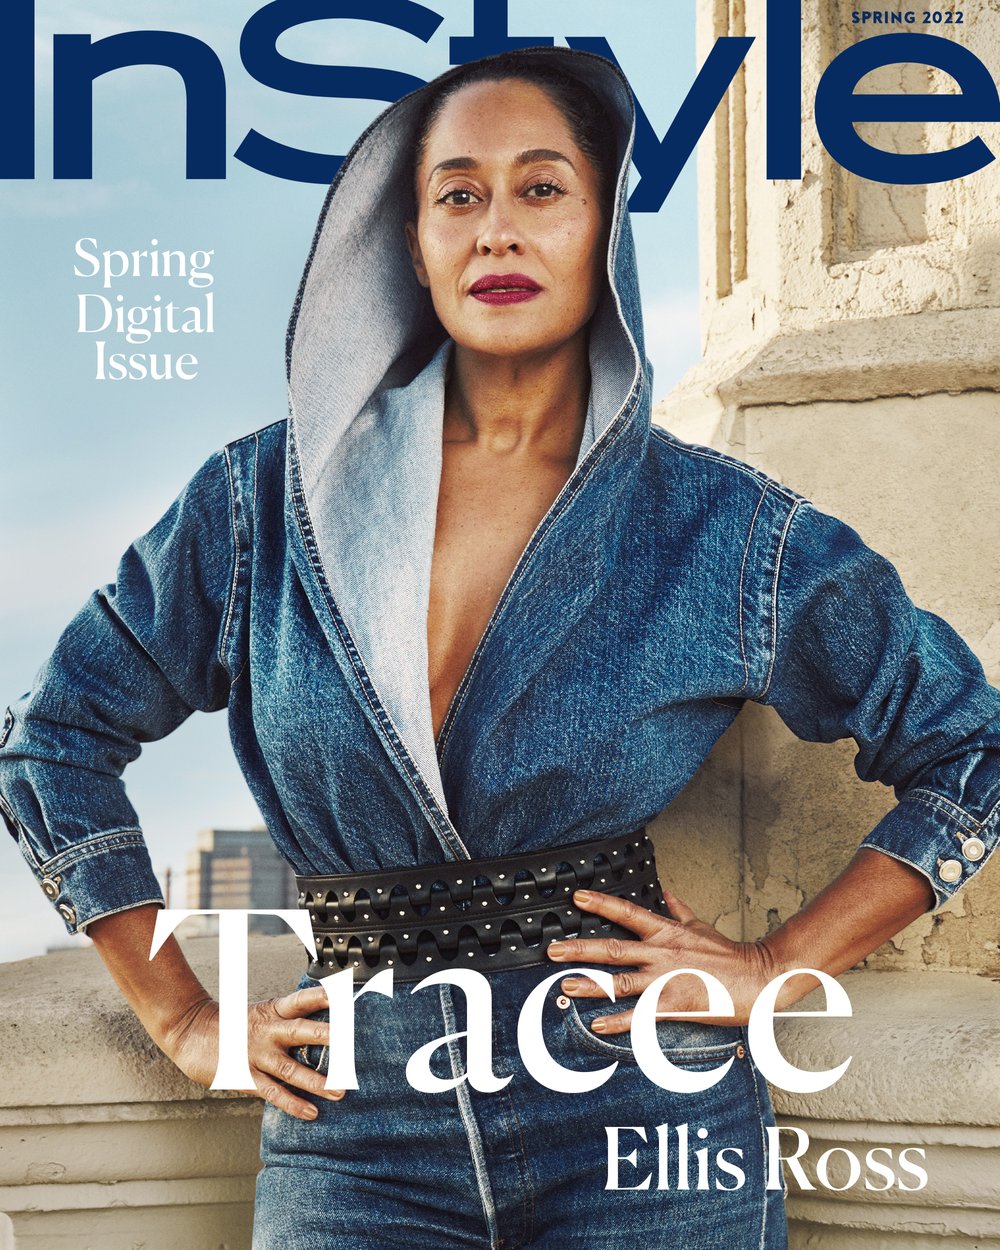 IS_DigitialIssue_Tracee_Cover.jpg